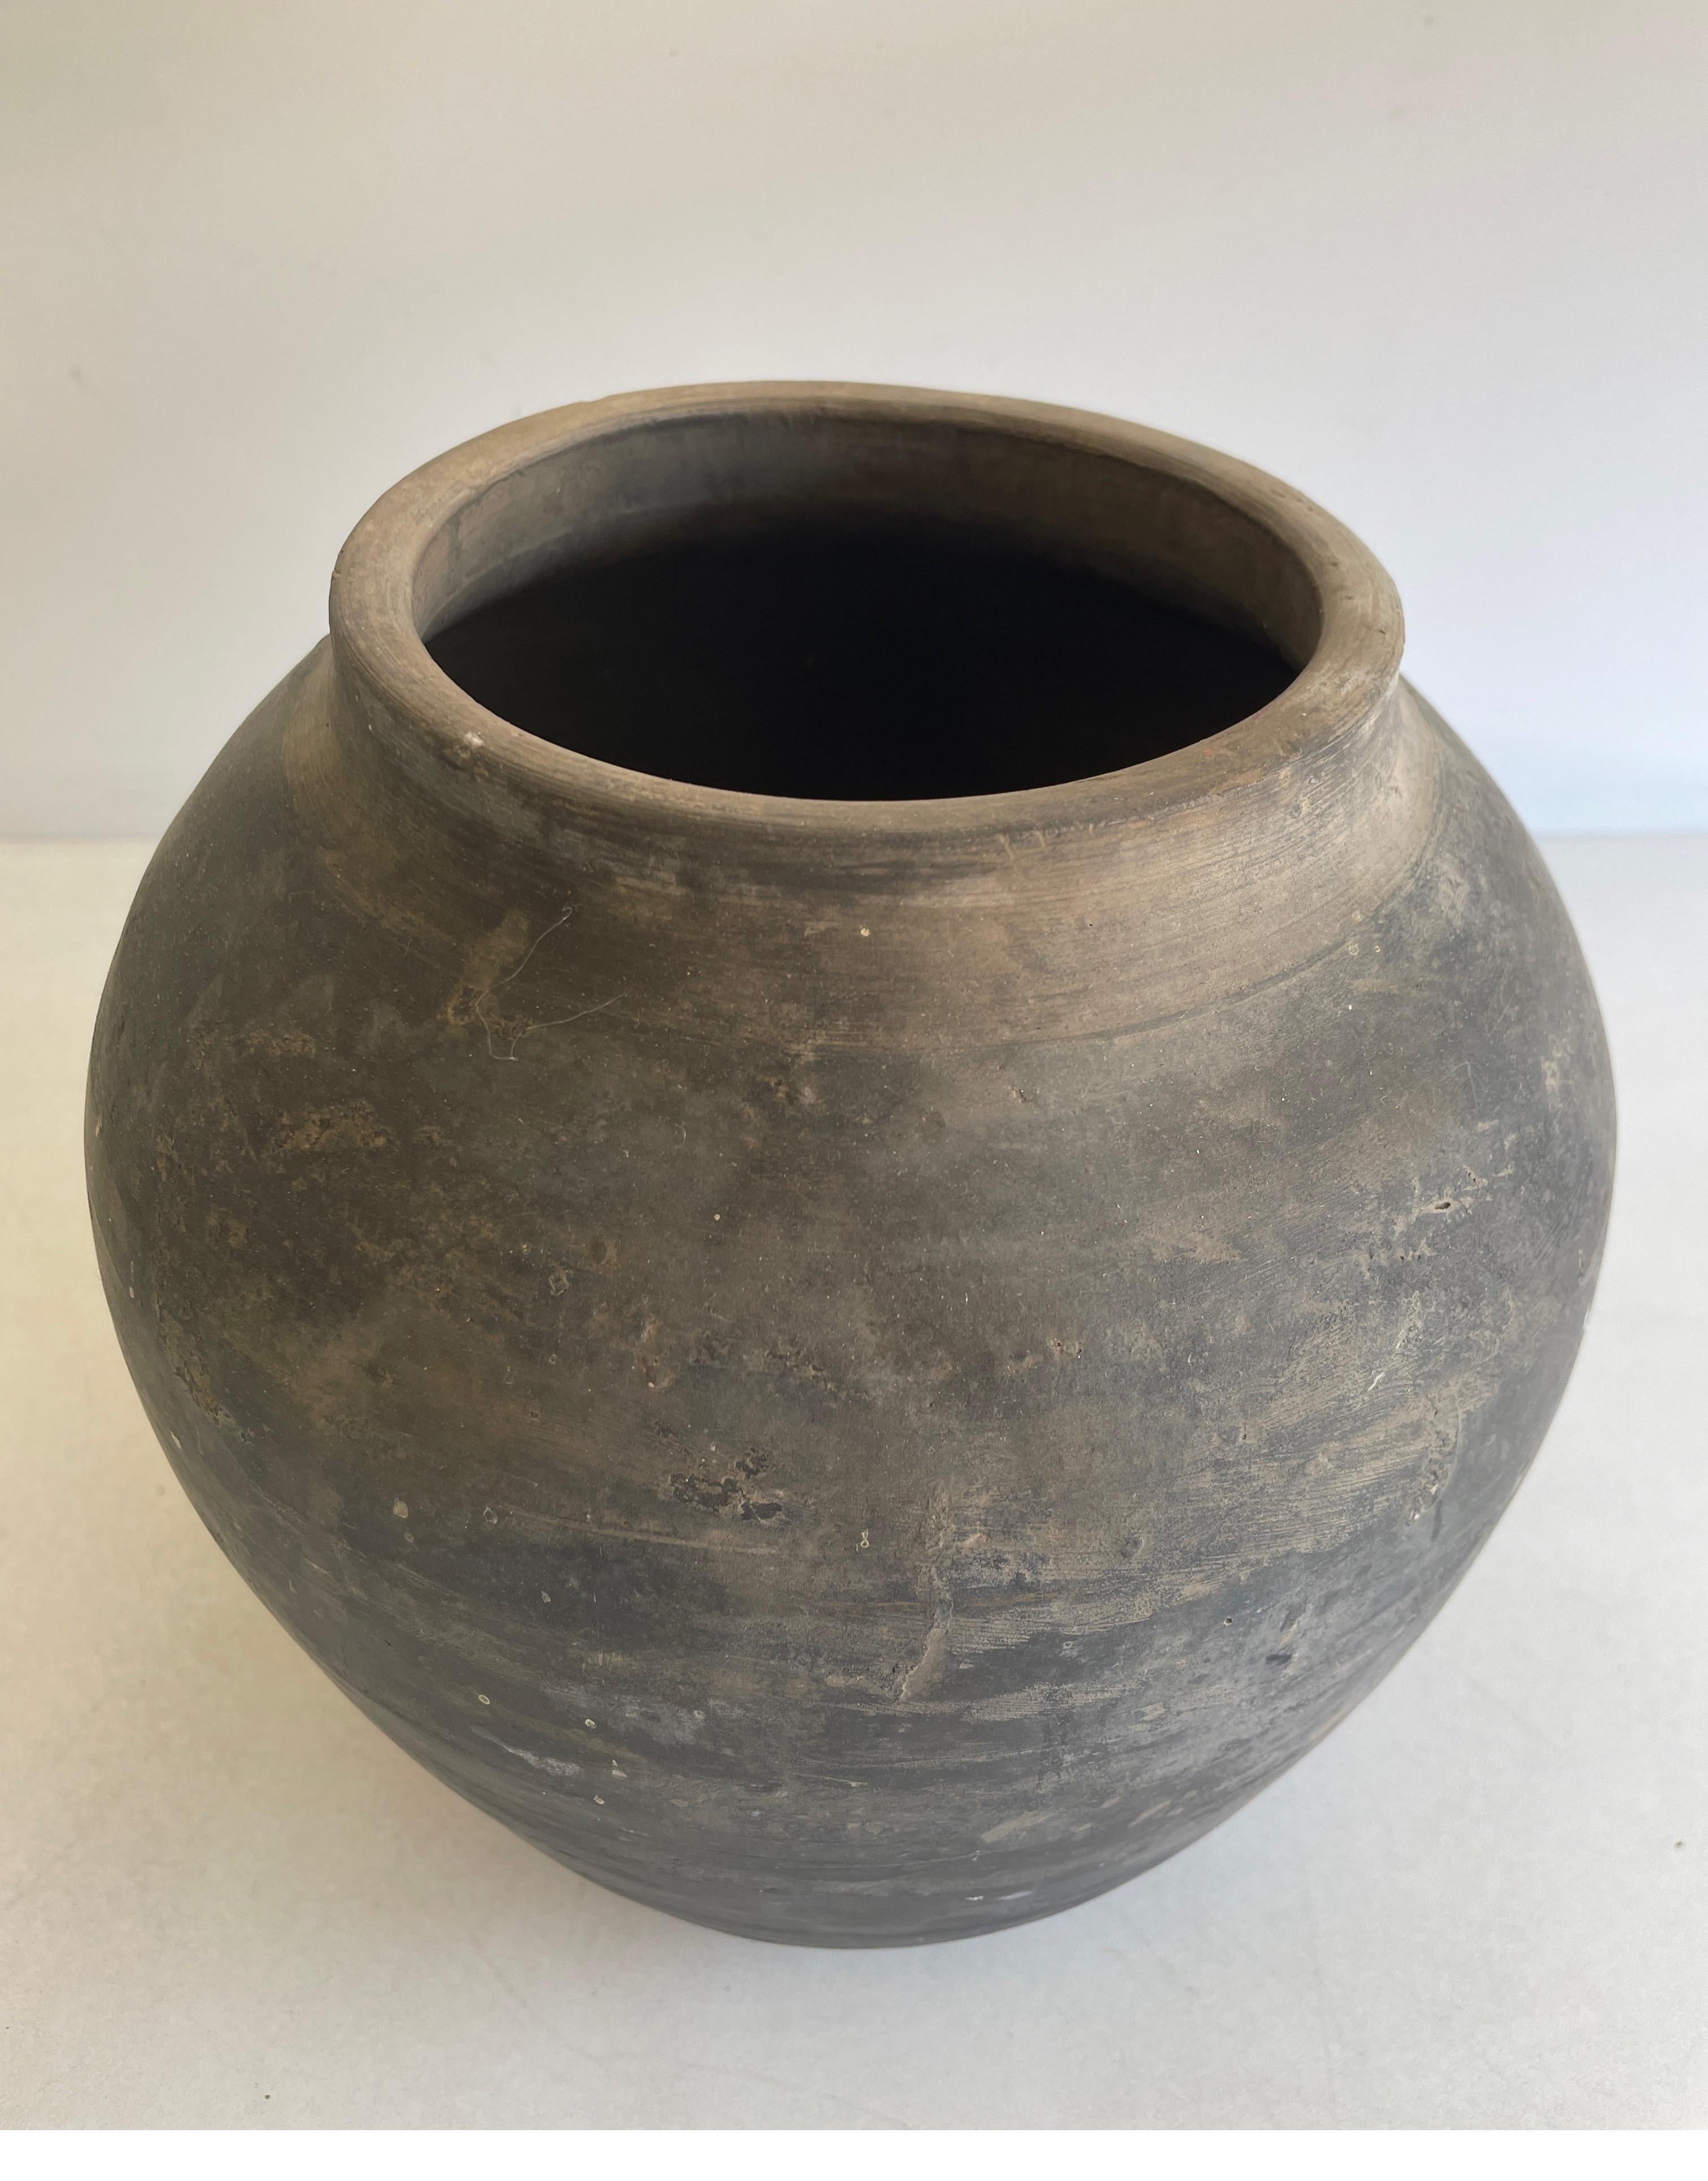 Vintage Pottery Beautiful and rich in character, this vintage oil pot adds just the right amount of texture + warmth where you need it. Stunning faded black/ brown unglazed finish with warm terra-cotta accents. Some have a more faded appearance than